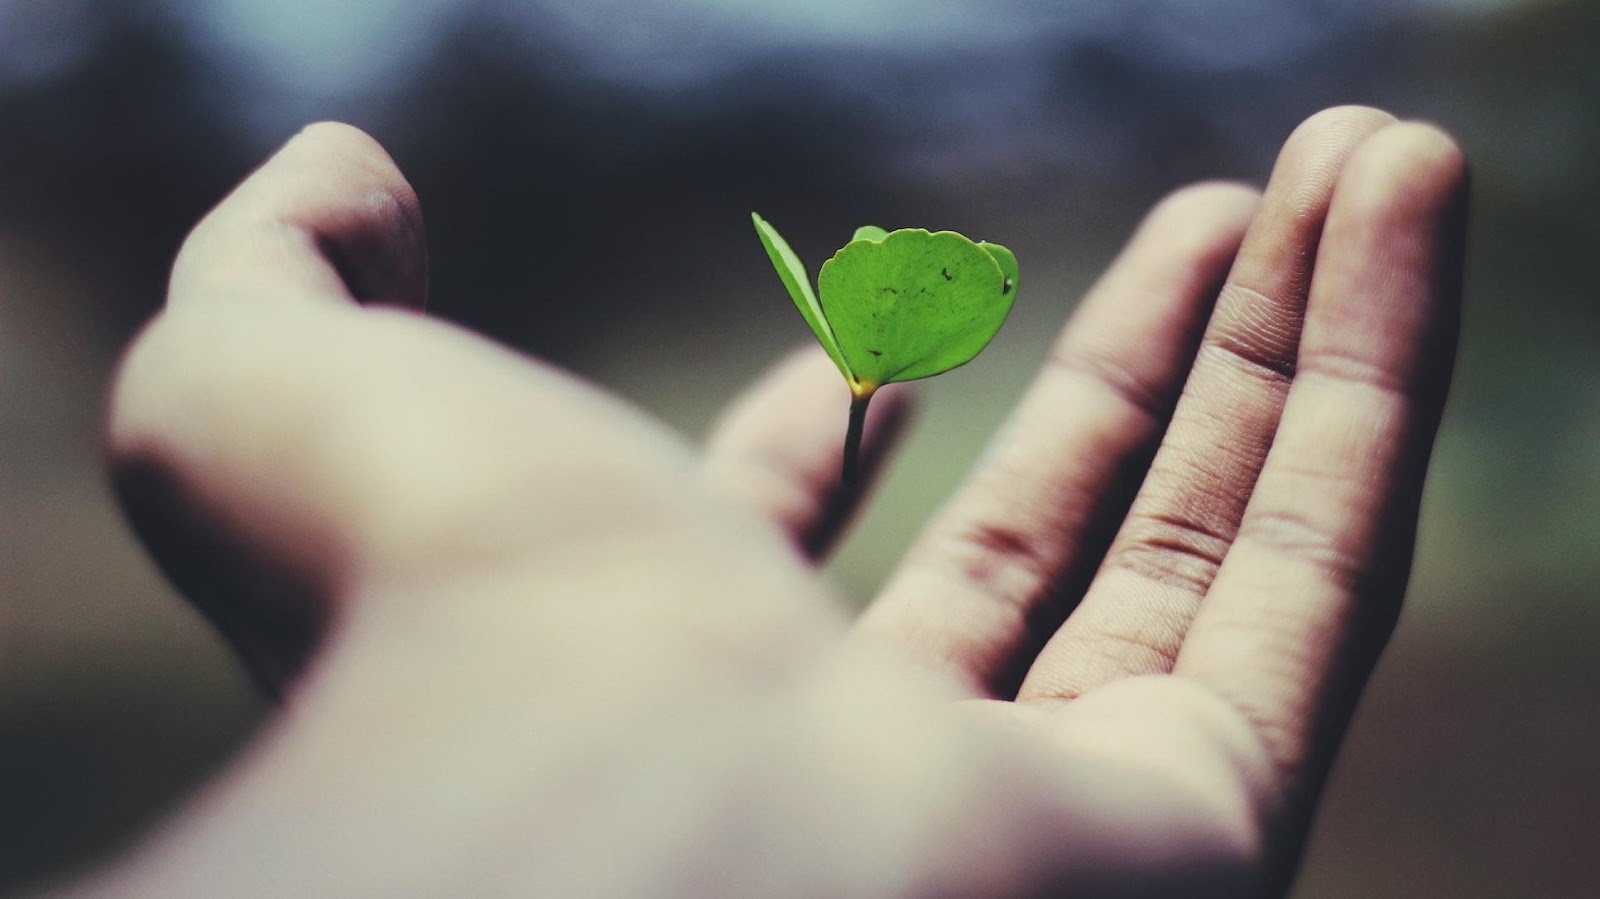 Floating green leaf on a person's hand